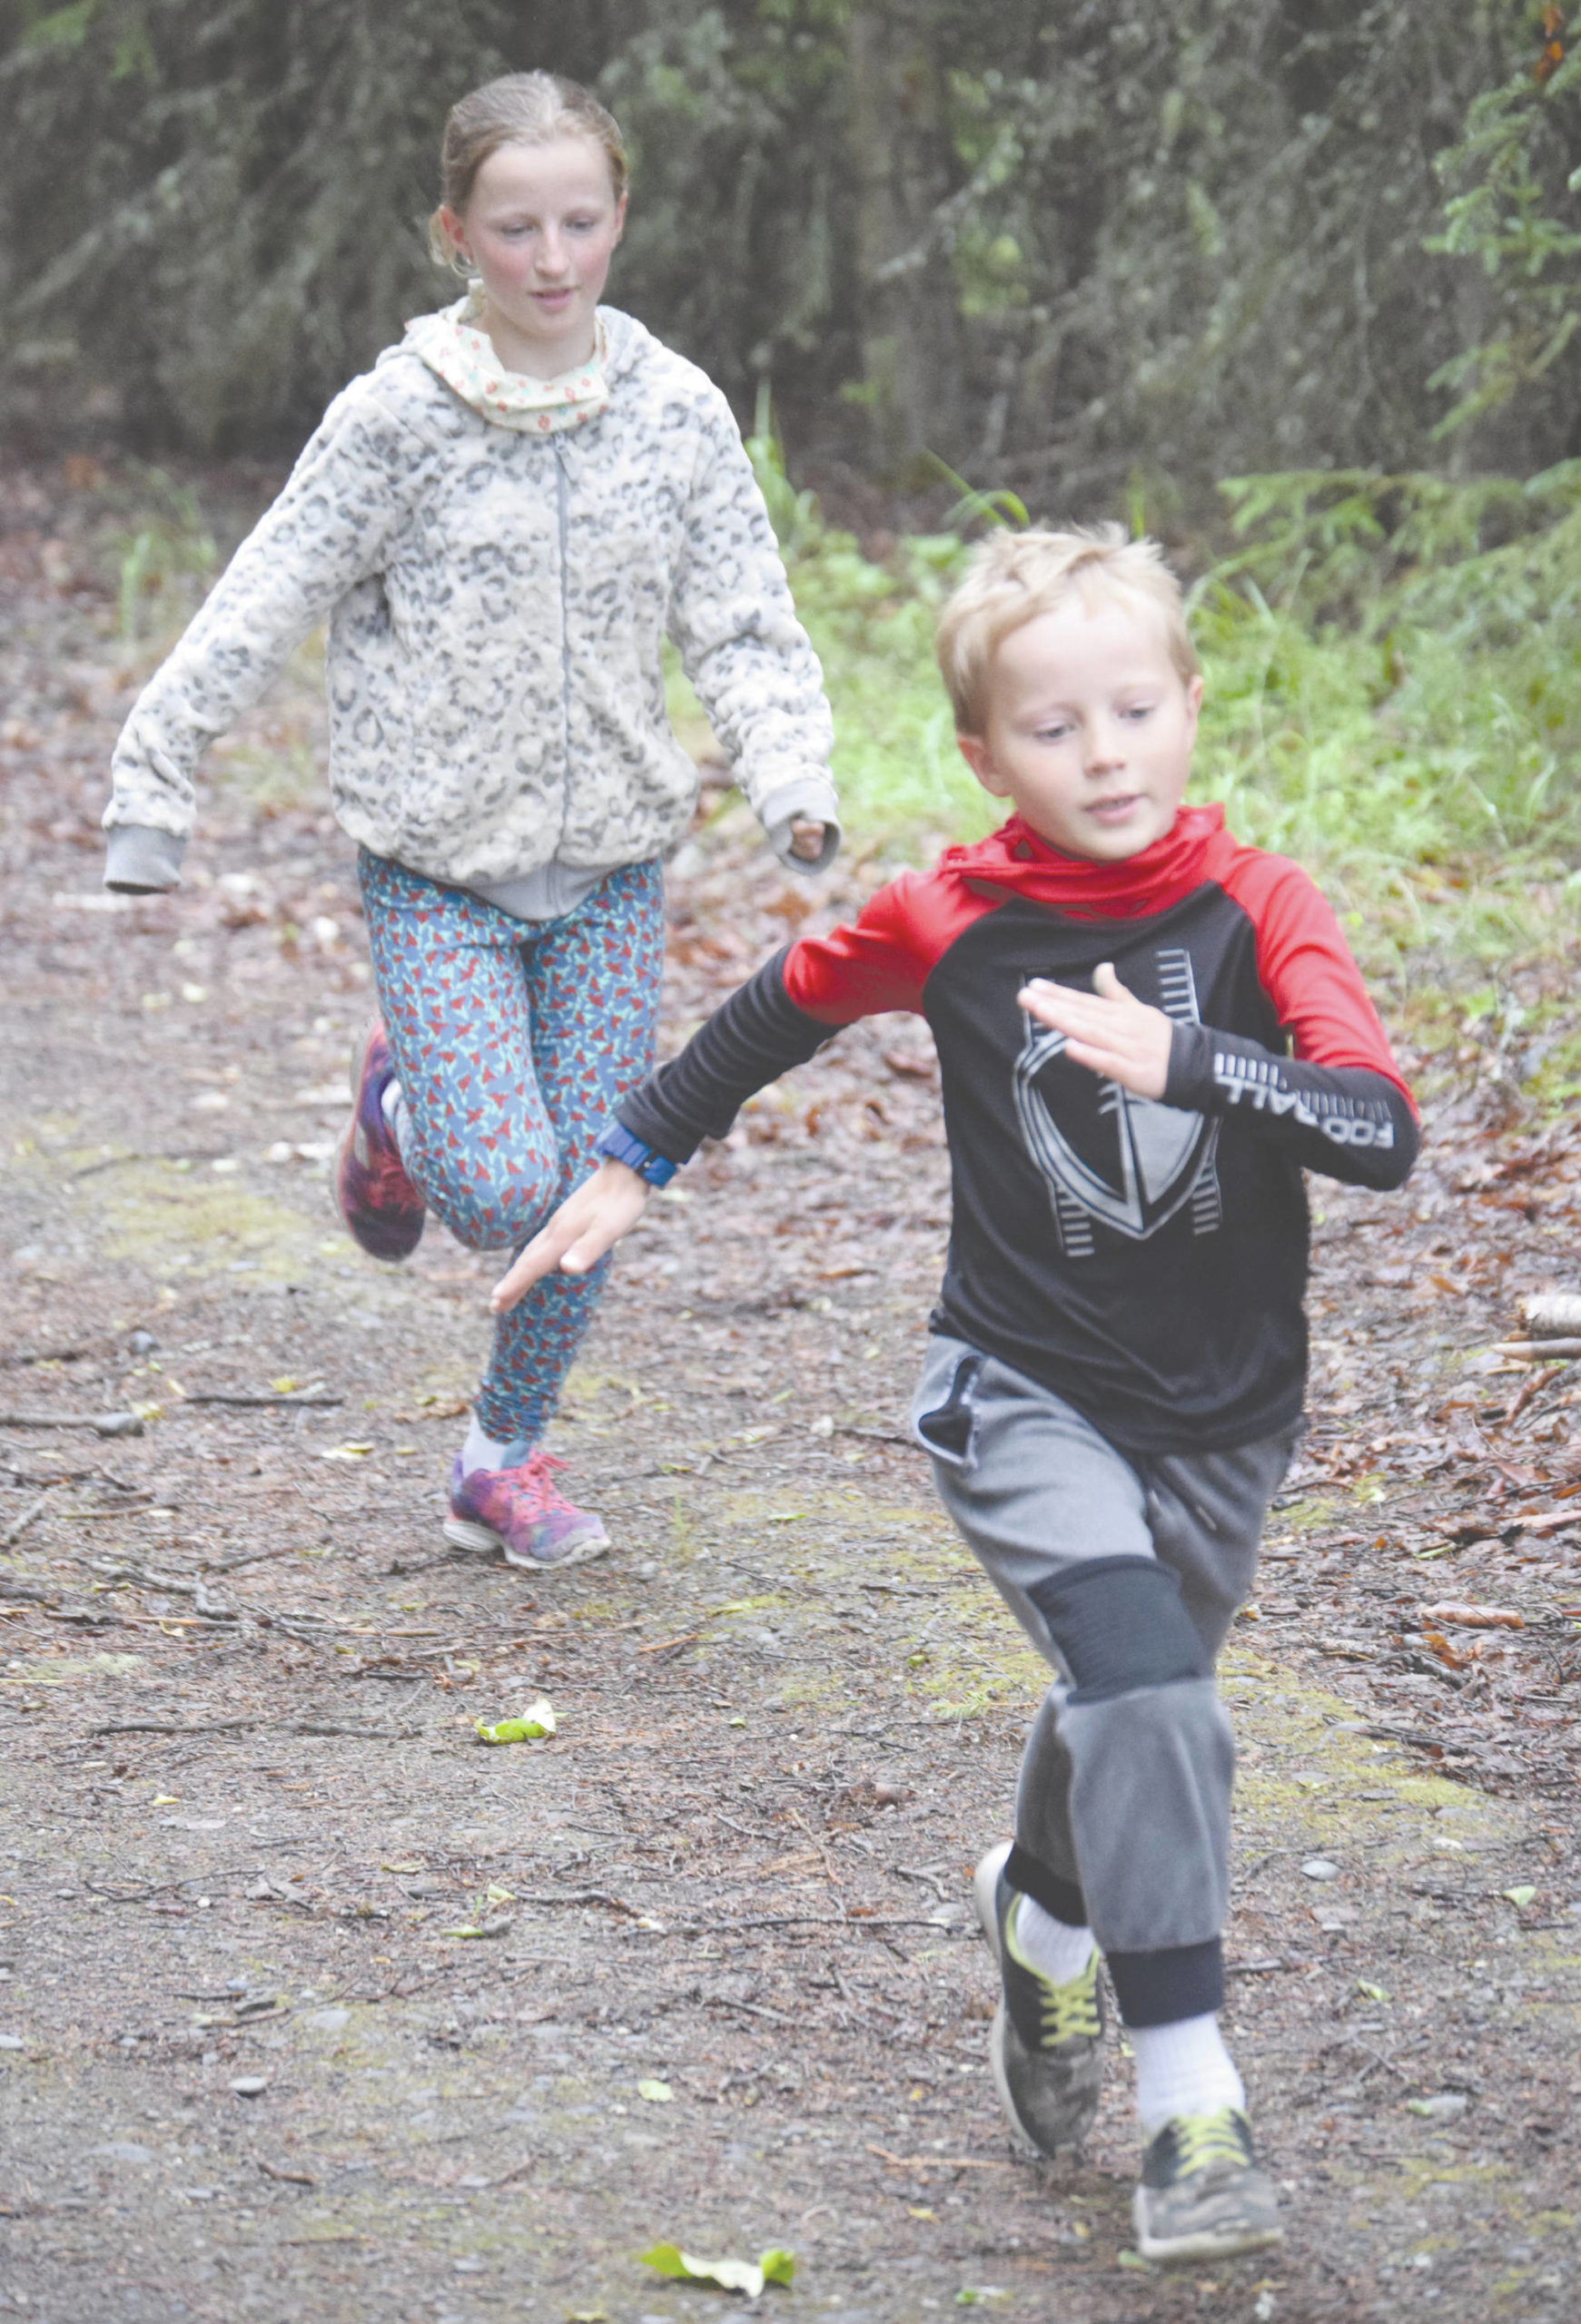 Dillon, 7, and Valarie, 11, McAnelly compete in the 1-kilometer kids race at the Salmon Run Series in Soldotna, Alaska, on Wednesday, July 8, 2020. Dillon won the race, while Valarie was second. (Photo by Jeff Helminiak/Peninsula Clarion)